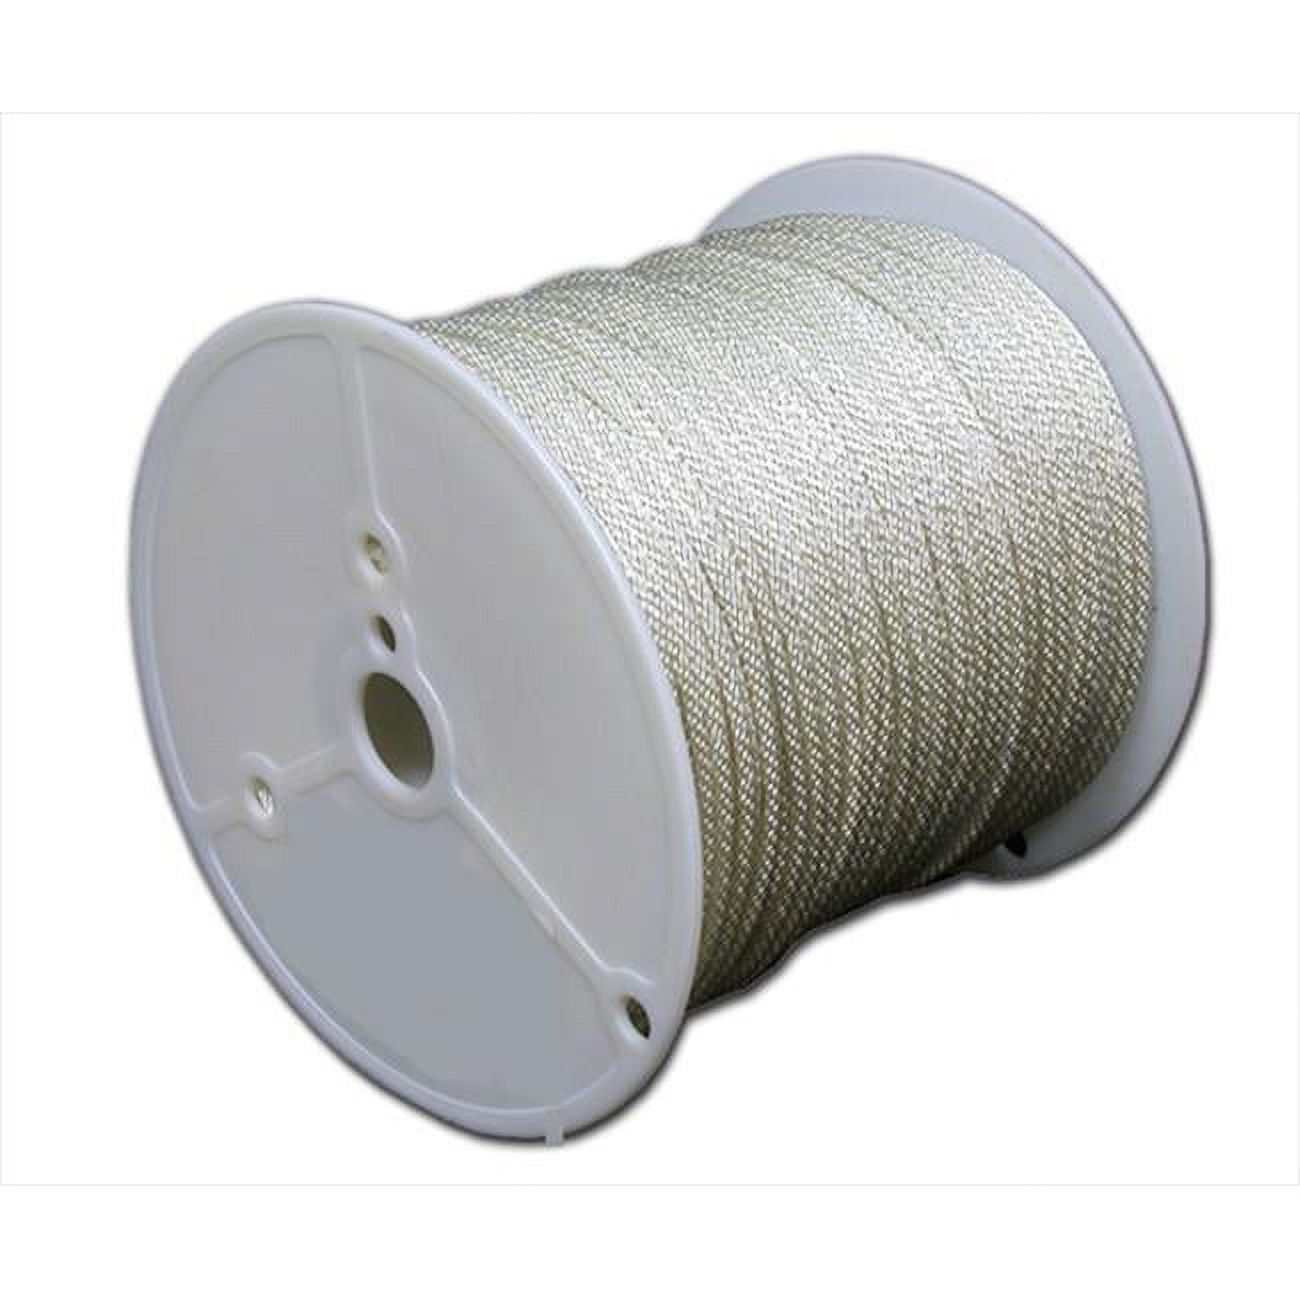 T.W. Evans Cordage 44-058 0.15625 in. x 500 ft. Solid Braid Nylon Rope Spool - image 1 of 1